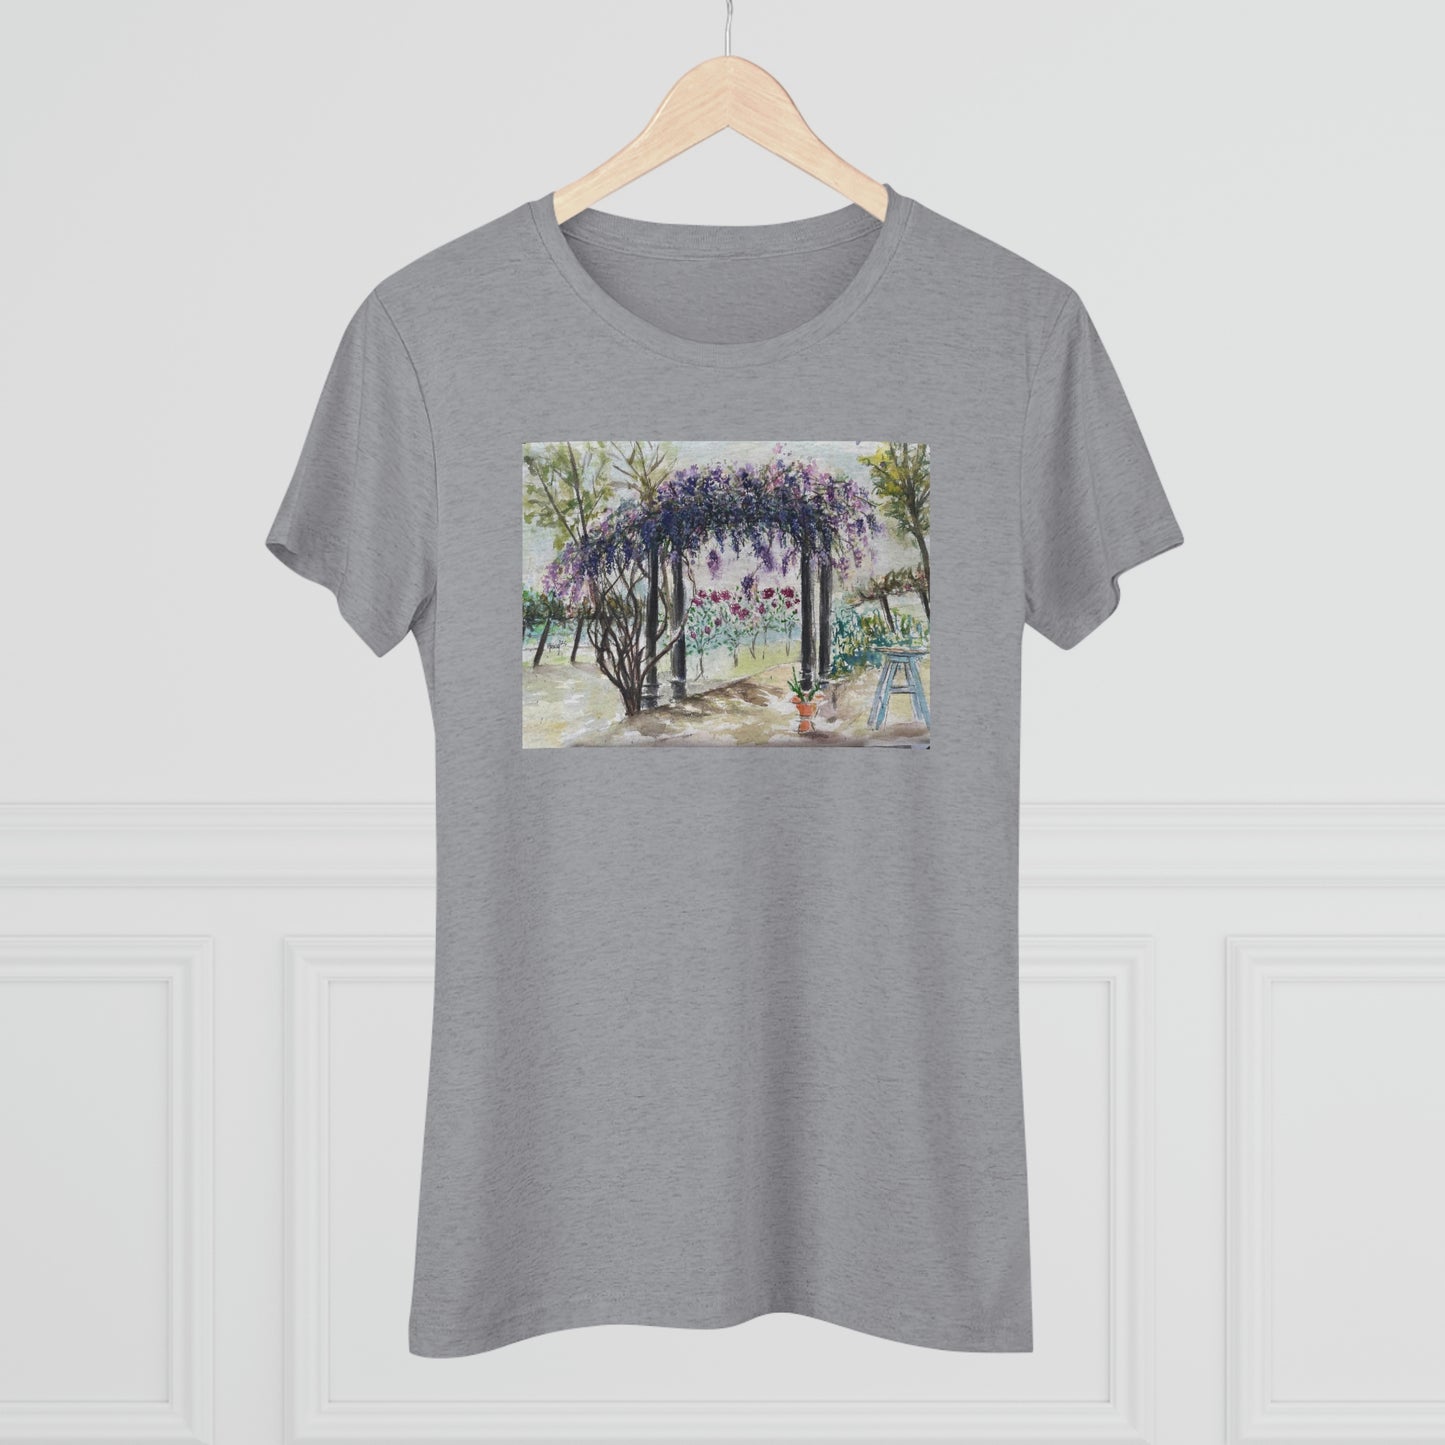 Wisteria at Somerset (no frame) Women's fitted Triblend Tee  tee shirt